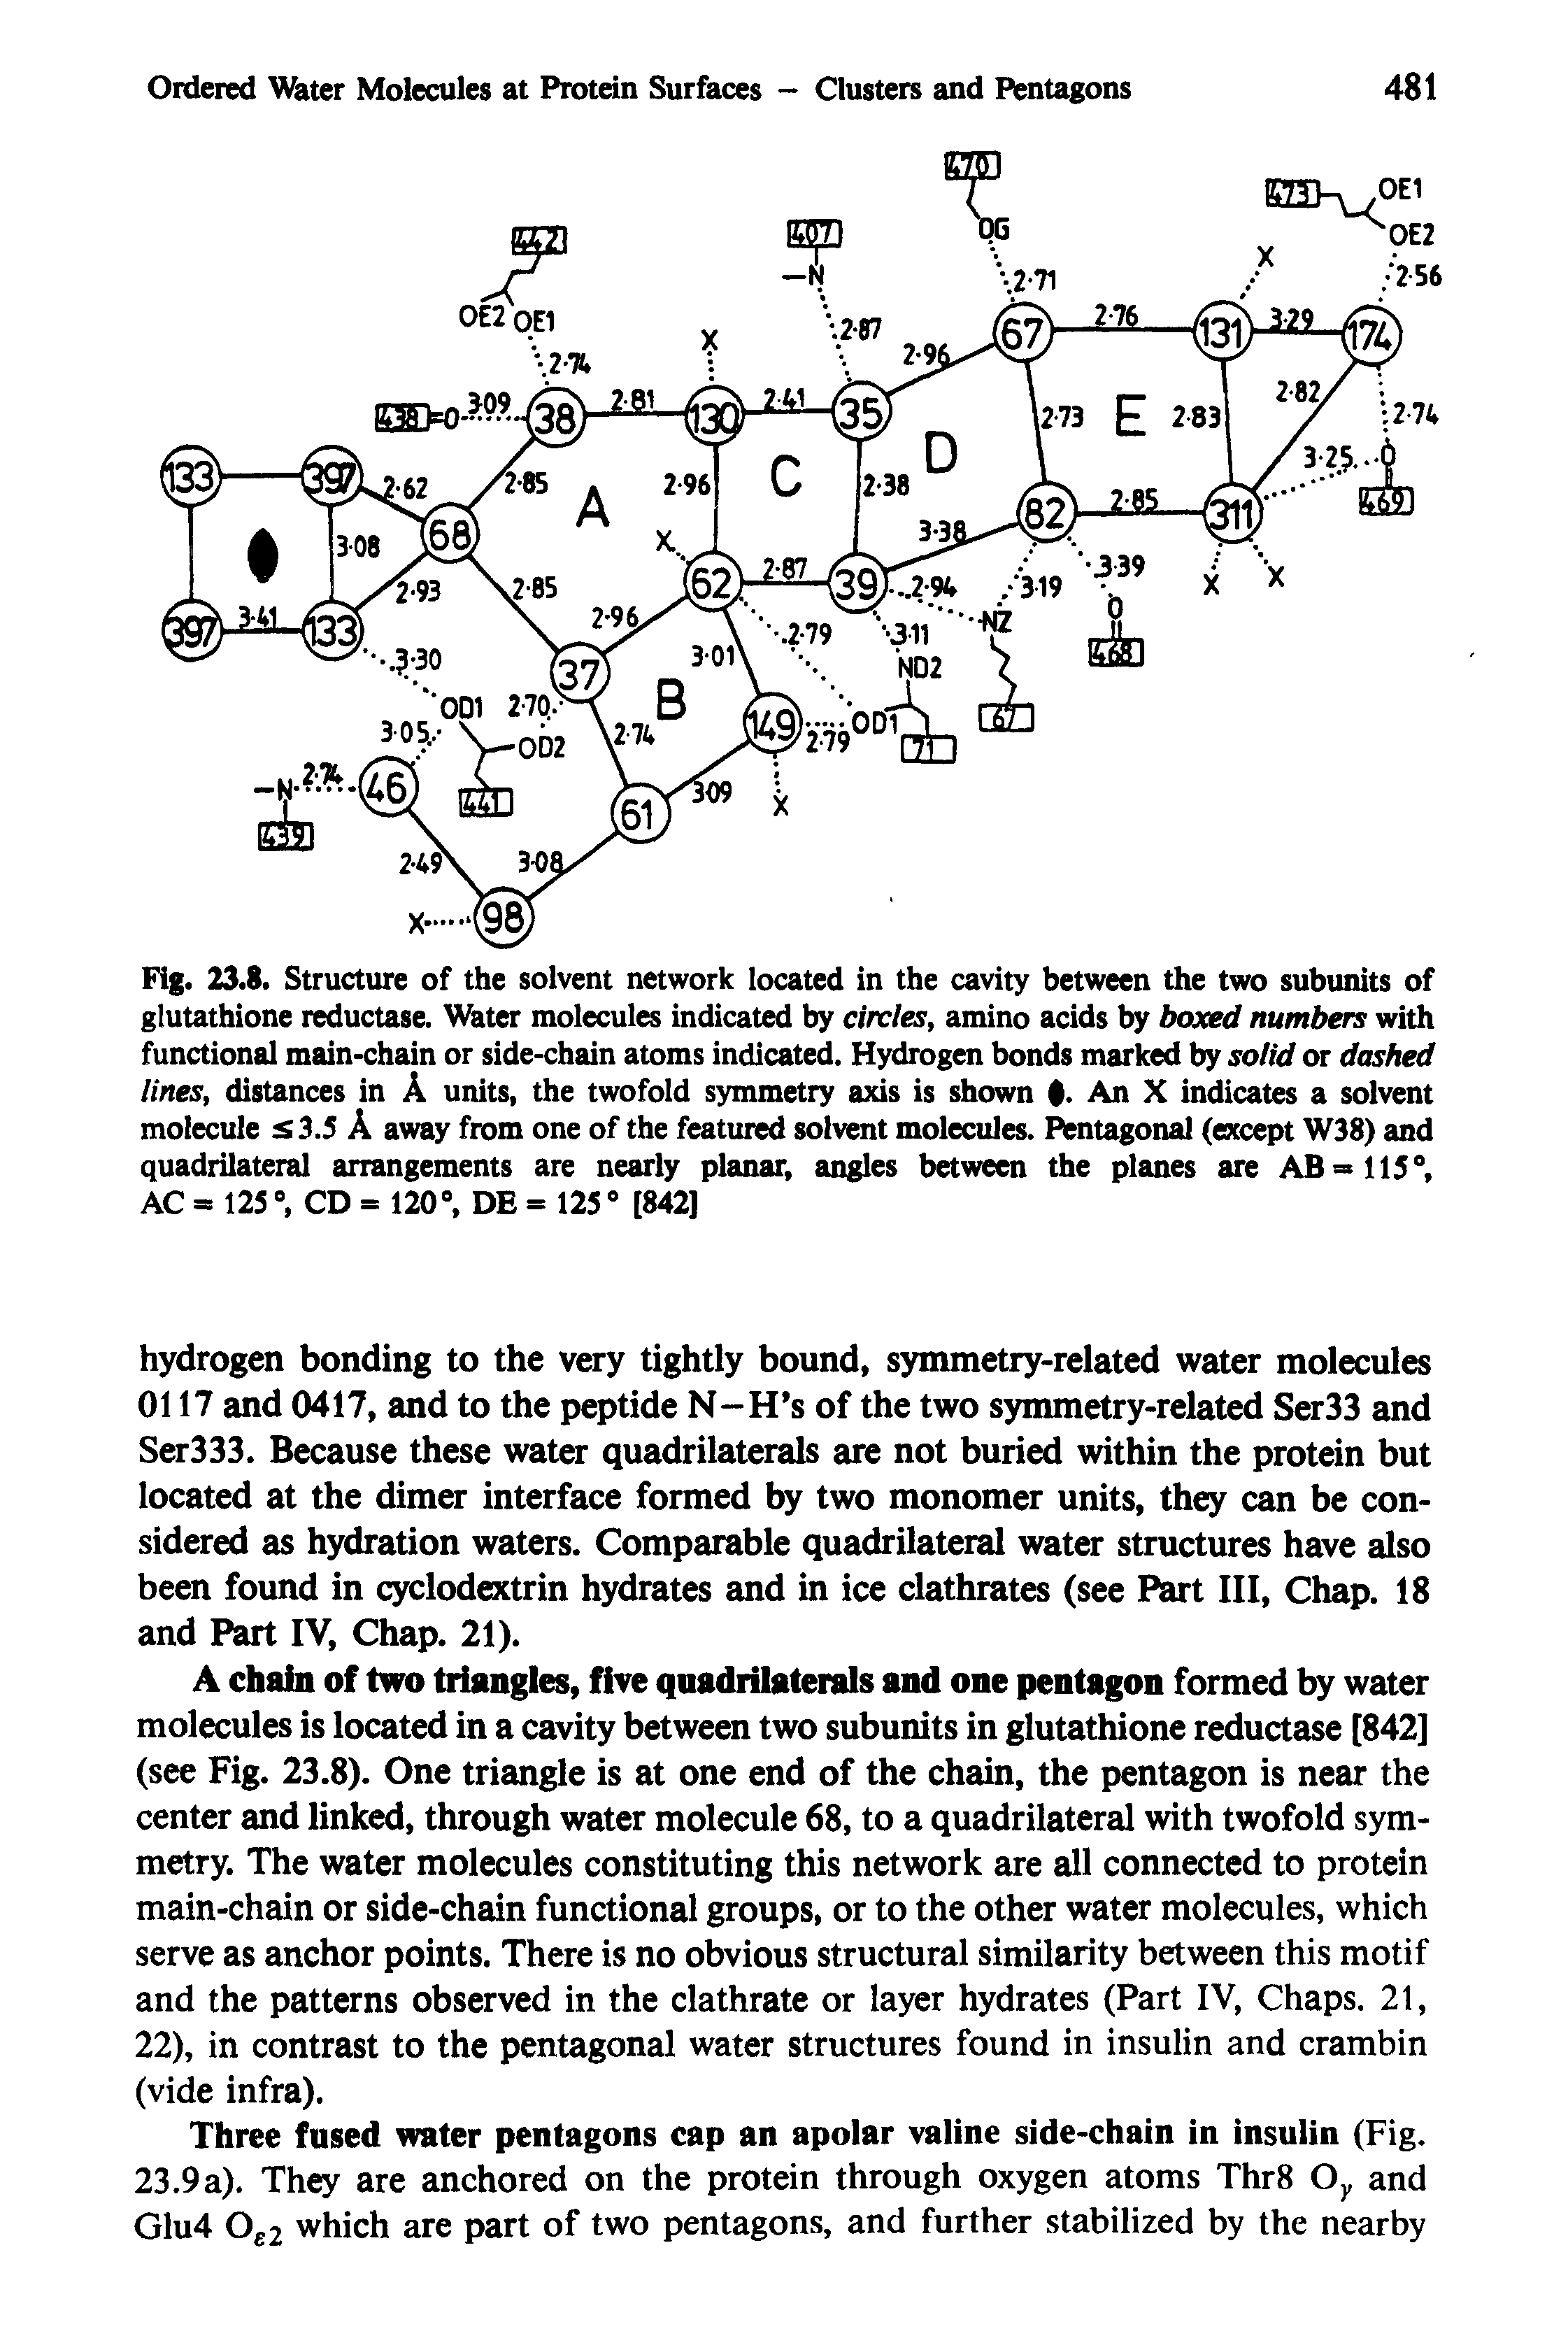 Fig. 23.8. Structure of the solvent network located in the cavity between the two subunits of glutathione reductase. Water molecules indicated by circles, amino acids by boxed numbers with functional main-chain or side-chain atoms indicated. Hydrogen bonds marked by solid or dashed lines, distances in A units, the twofold symmetry axis is shown An X indicates a solvent molecule s3.5 A away from one of the featured solvent molecules. Pentagonal (except W38) and quadrilateral arrangements are nearly planar, angles between the planes are AB =115°, AC = 125 °, CD = 120°, DE = 125 0 [842]...